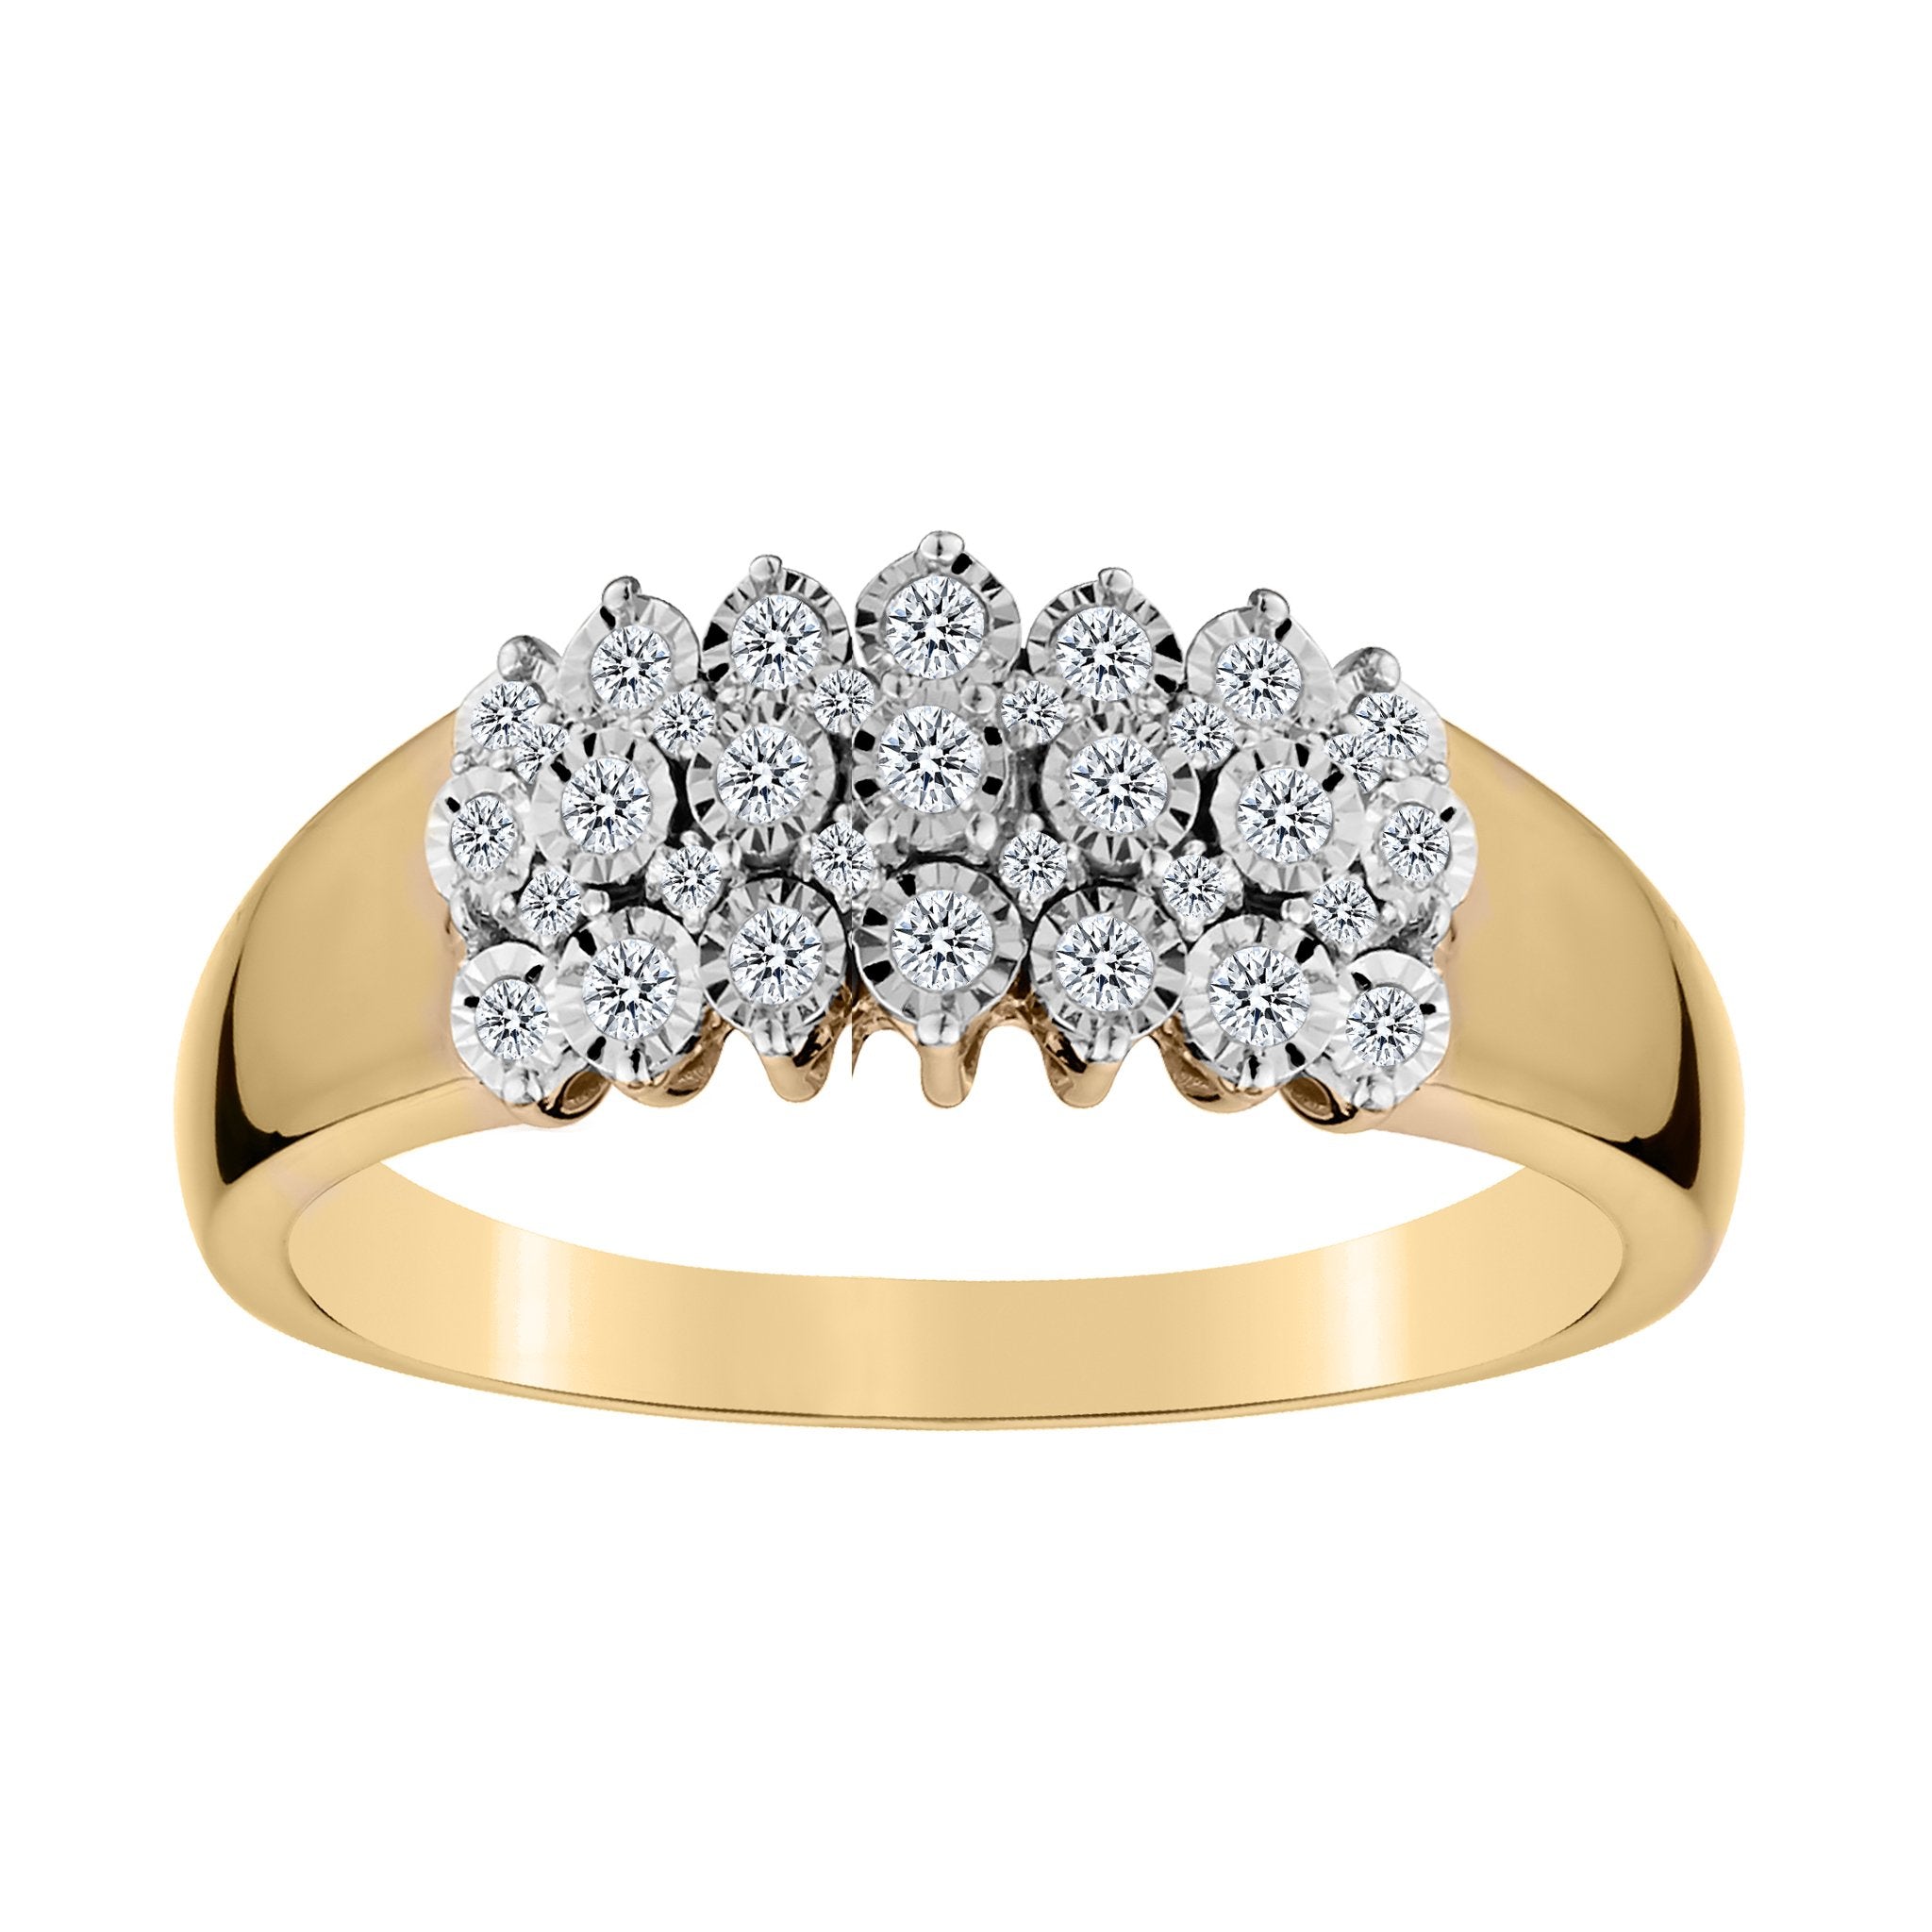 .25 CARAT DIAMOND "STAIRWAY TO HEAVEN" RING, 14kt YELLOW GOLD. Fashion Rings - Griffin Jewellery Designs